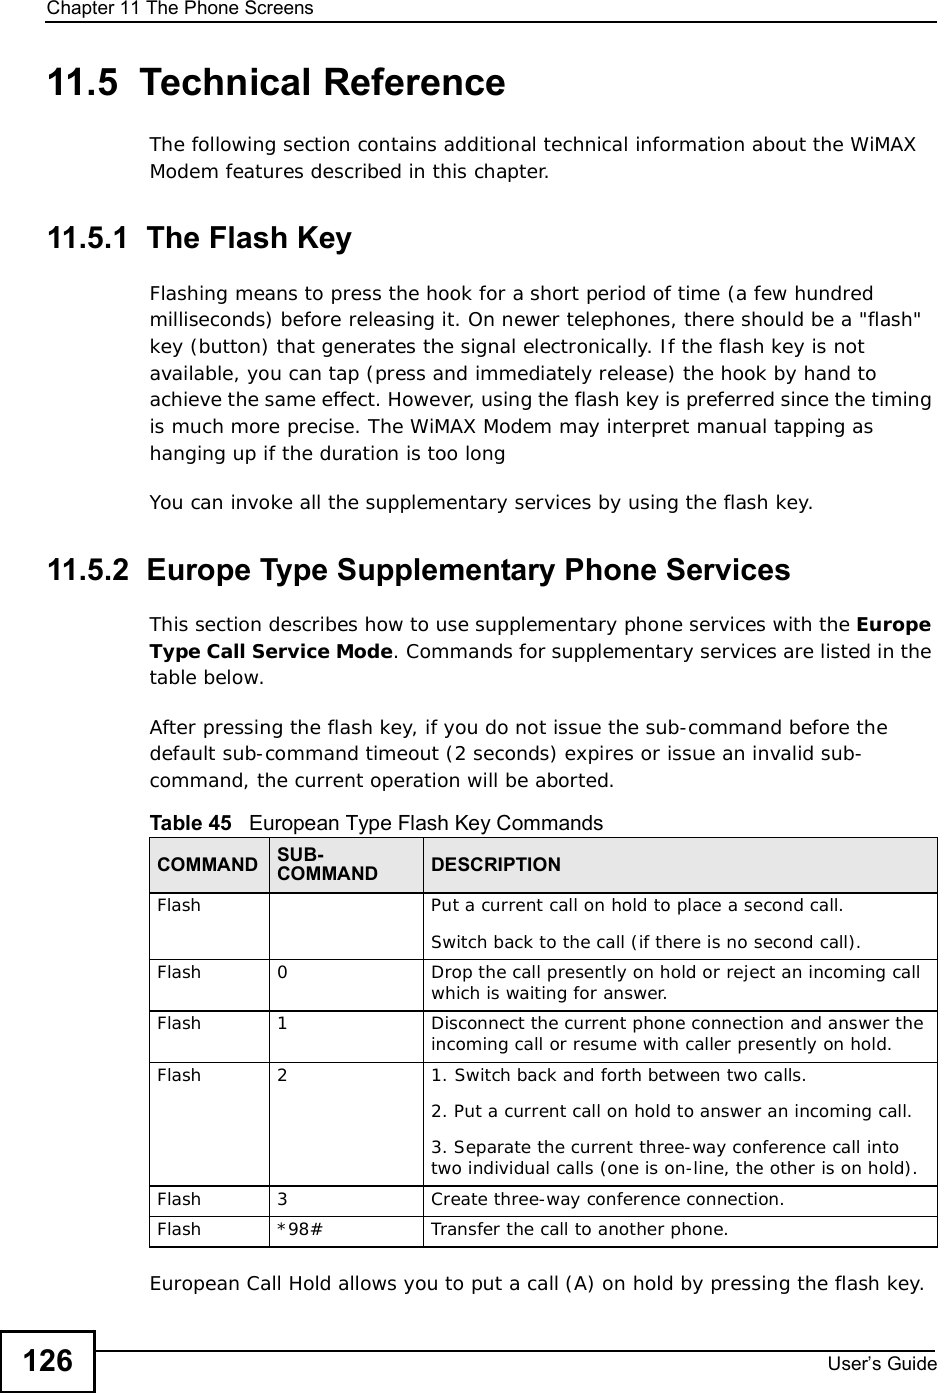 Chapter 11The Phone ScreensUser s Guide12611.5  Technical ReferenceThe following section contains additional technical information about the WiMAX Modem features described in this chapter.11.5.1  The Flash KeyFlashing means to press the hook for a short period of time (a few hundred milliseconds) before releasing it. On newer telephones, there should be a &quot;flash&quot; key (button) that generates the signal electronically. If the flash key is not available, you can tap (press and immediately release) the hook by hand to achieve the same effect. However, using the flash key is preferred since the timing is much more precise. The WiMAX Modem may interpret manual tapping as hanging up if the duration is too longYou can invoke all the supplementary services by using the flash key. 11.5.2  Europe Type Supplementary Phone ServicesThis section describes how to use supplementary phone services with the Europe TypeCall Service Mode. Commands for supplementary services are listed in the table below.After pressing the flash key, if you do not issue the sub-command before the default sub-command timeout (2 seconds) expires or issue an invalid sub-command, the current operation will be aborted.European Call Hold allows you to put a call (A) on hold by pressing the flash key. Table 45   European Type Flash Key CommandsCOMMAND SUB-COMMAND DESCRIPTIONFlash Put a current call on hold to place a second call.Switch back to the call (if there is no second call).Flash0Drop the call presently on hold or reject an incoming call which is waiting for answer.Flash1Disconnect the current phone connection and answer the incoming call or resume with caller presently on hold.Flash21. Switch back and forth between two calls.2. Put a current call on hold to answer an incoming call.3. Separate the current three-way conference call into two individual calls (one is on-line, the other is on hold).Flash3Create three-way conference connection.Flash *98#Transfer the call to another phone.